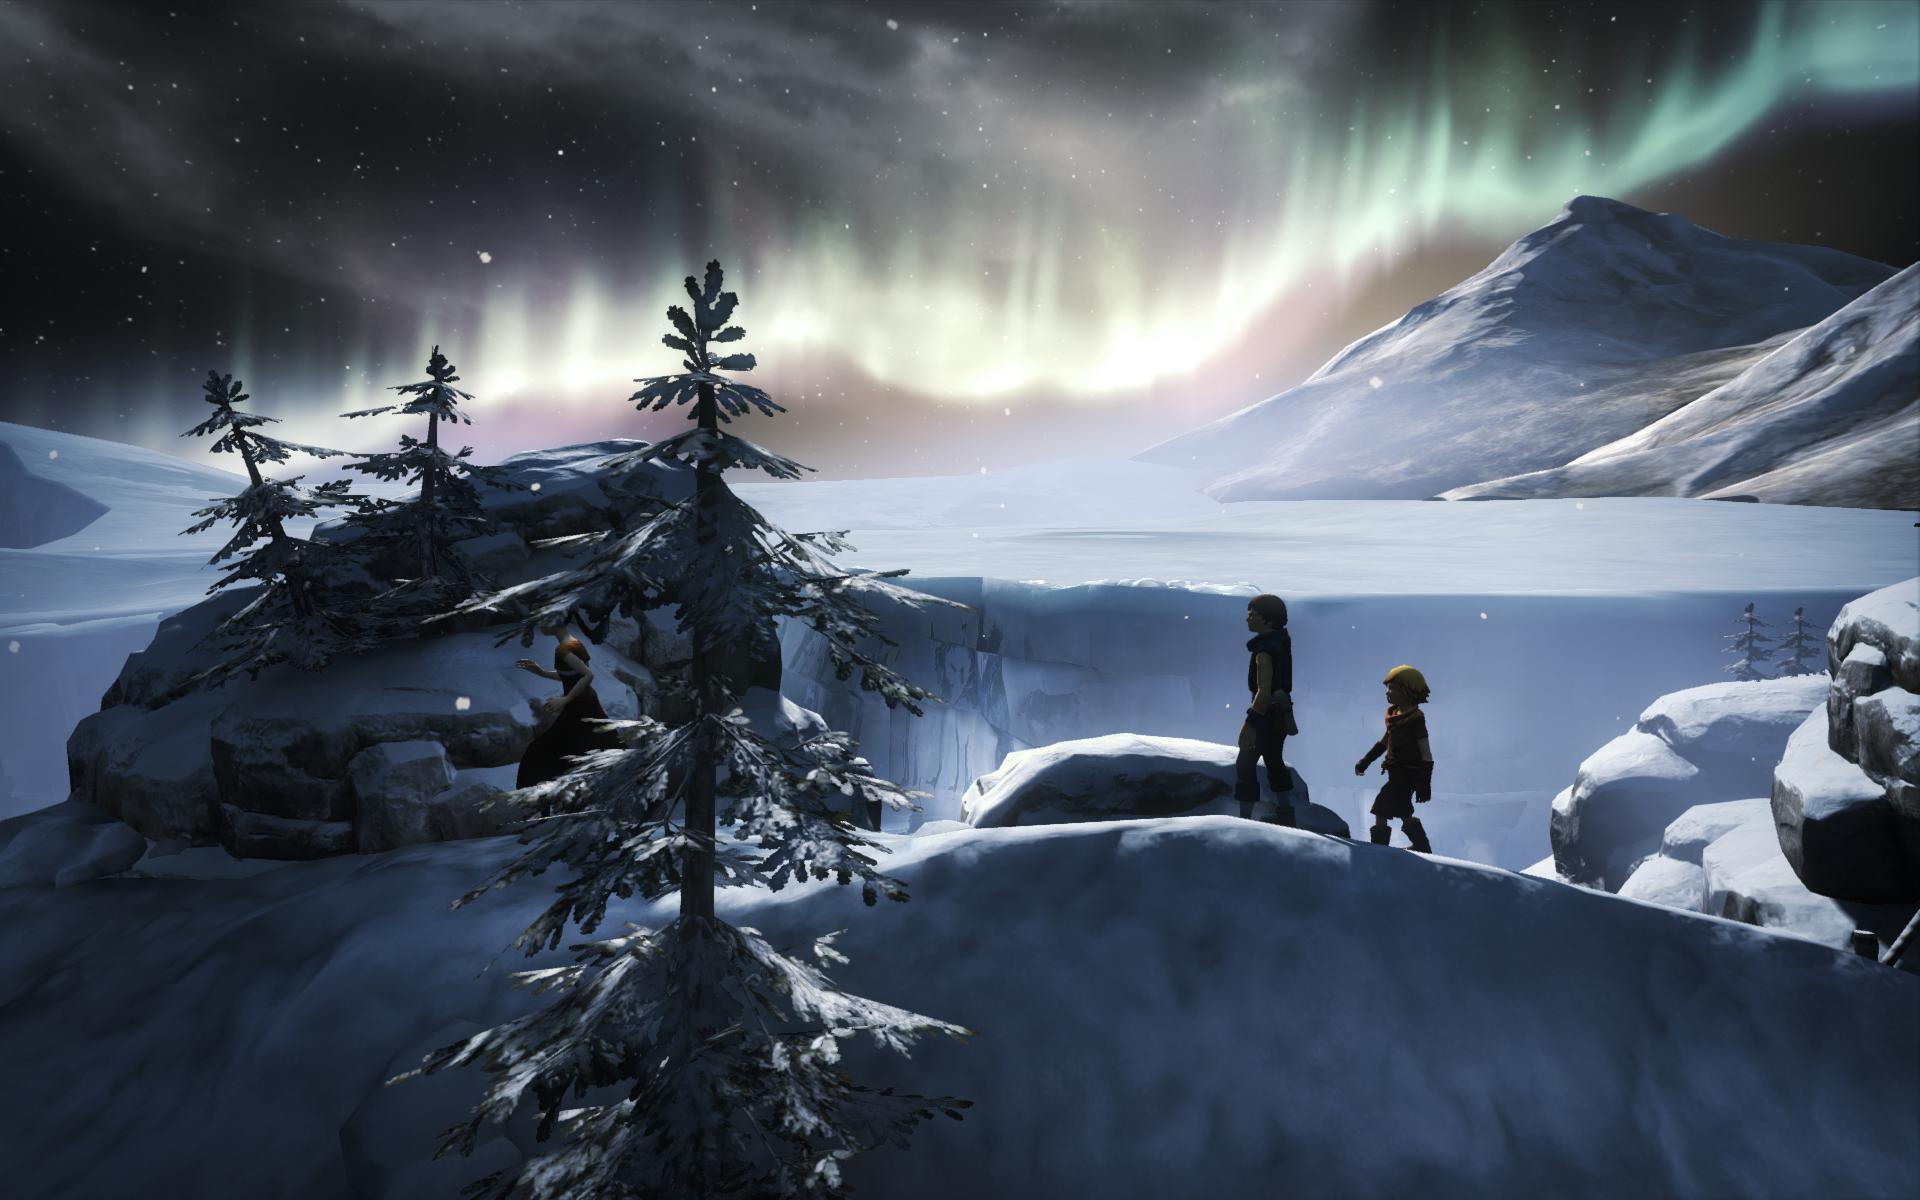 download brothers a tale of two sons metacritic